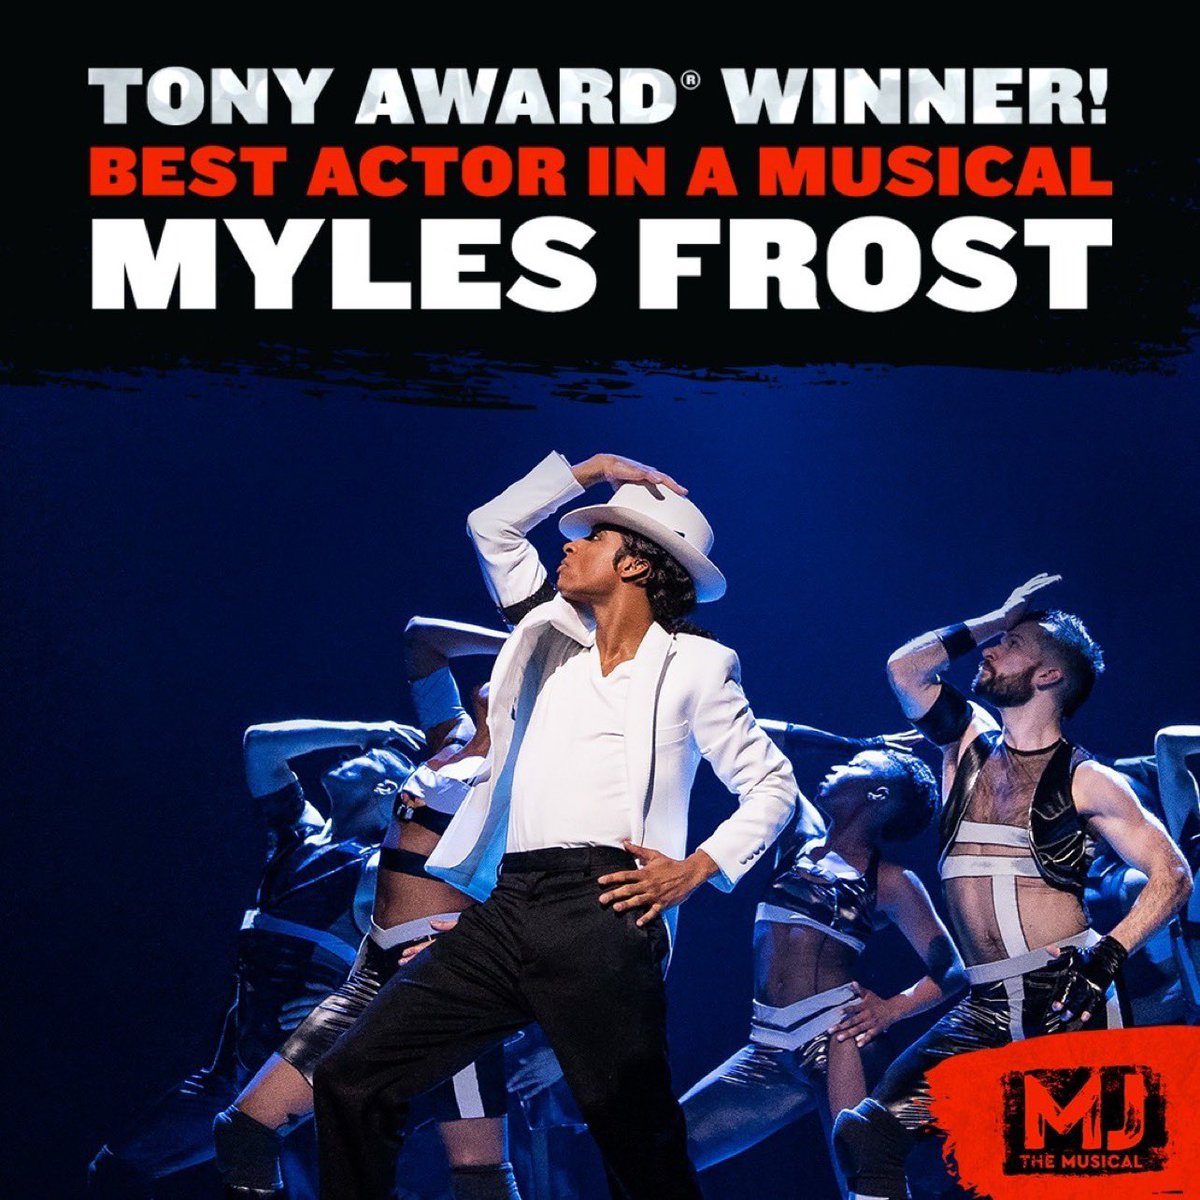 HE WON! MYLES FROST!!! You are BOWIEBOLD 🖤💛 Congratulations and we are so proud of you! 👏🏿👏🏿👏🏿🌟🌟🌟🌟